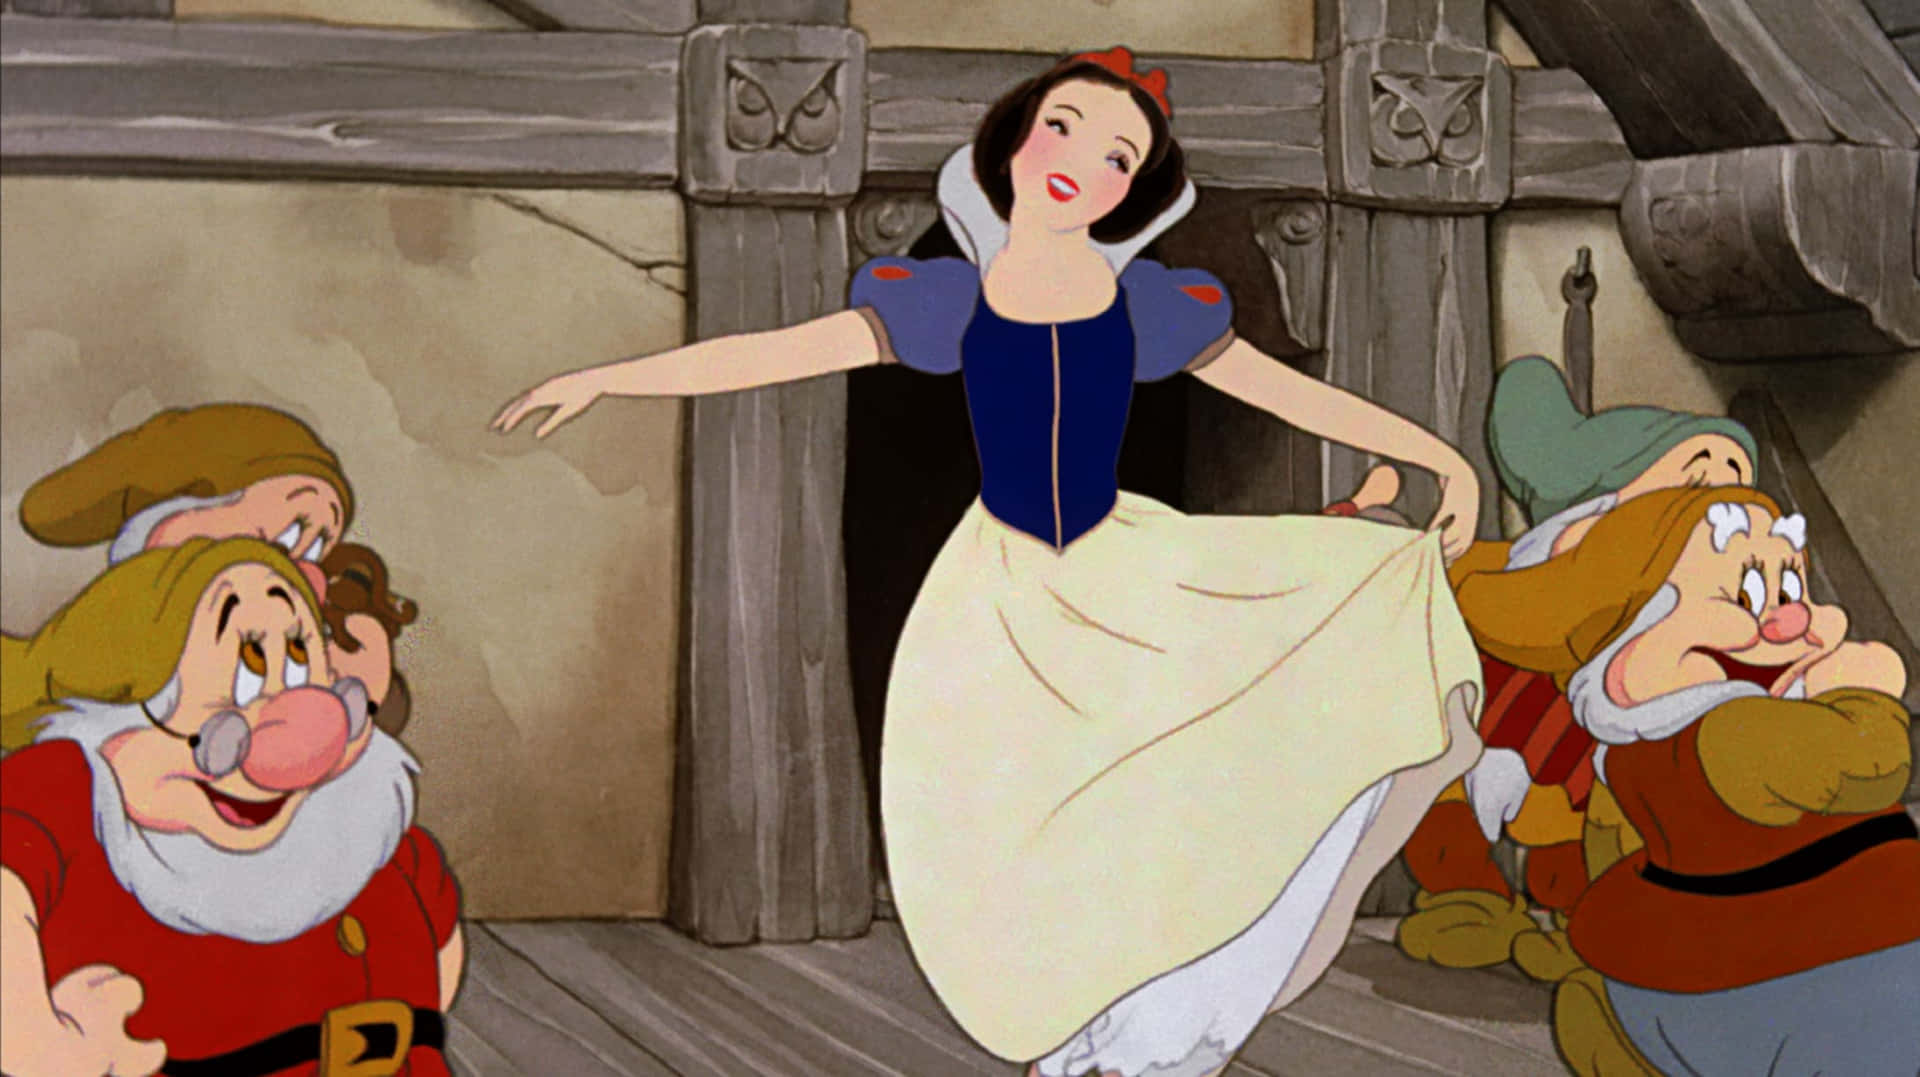 Snow White in her magical kingdom